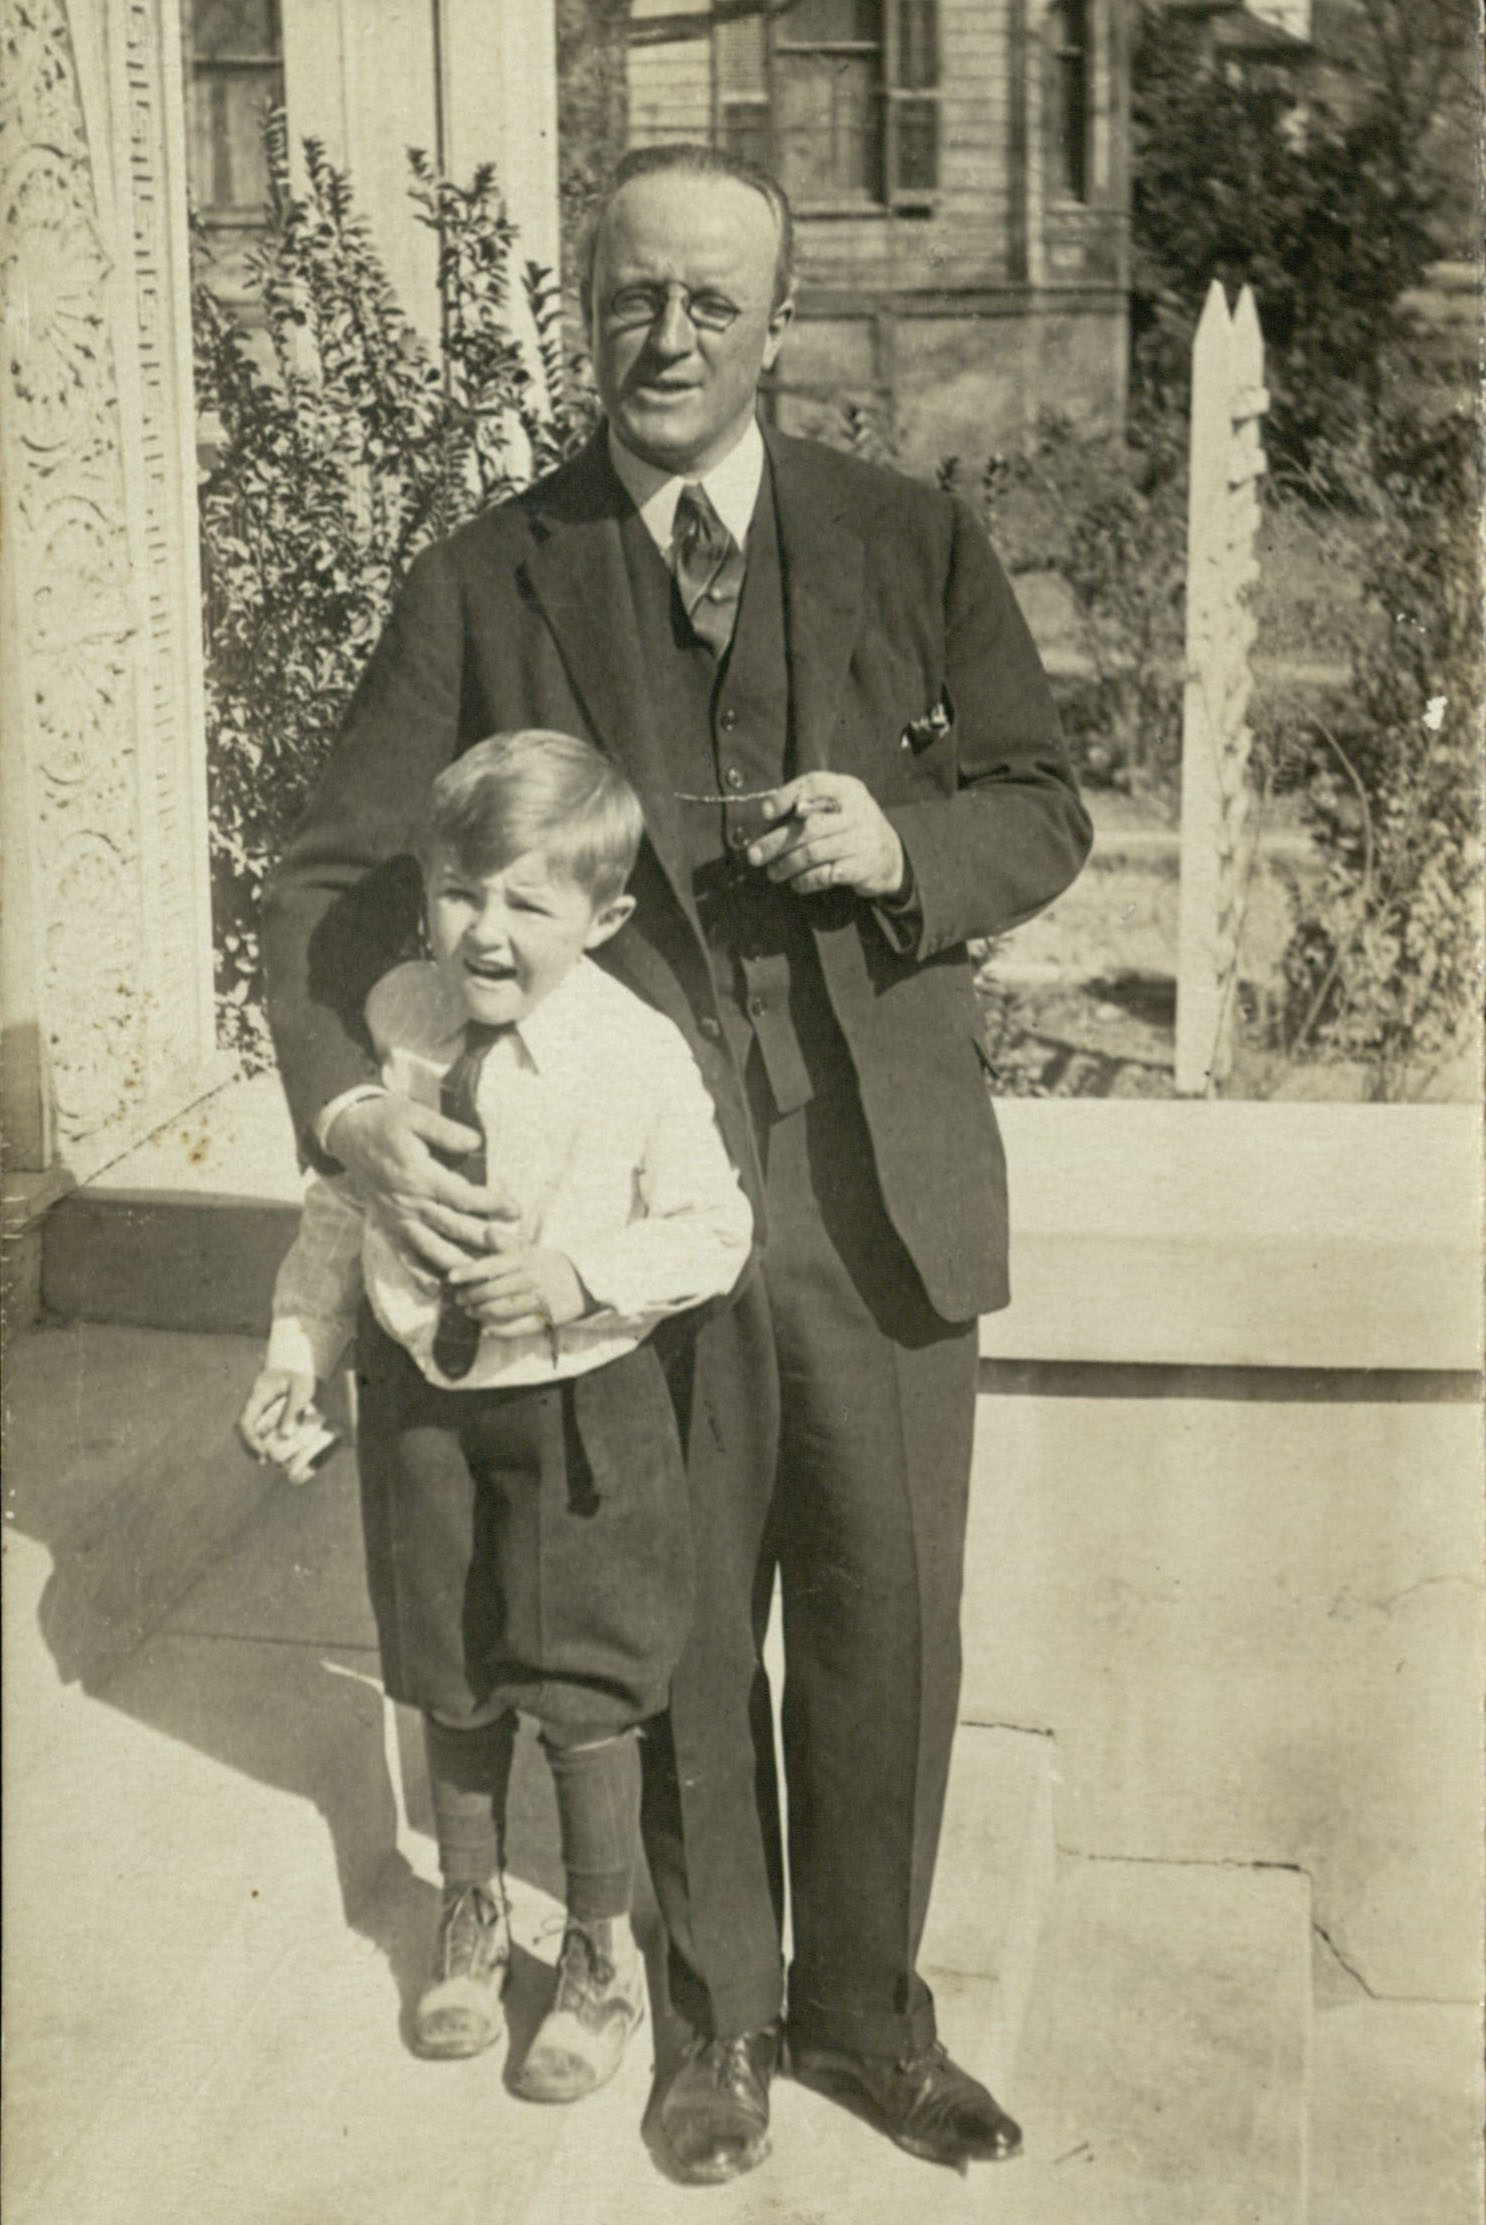 Carl Lovelace with one of his sons outside their home in Waco, undated